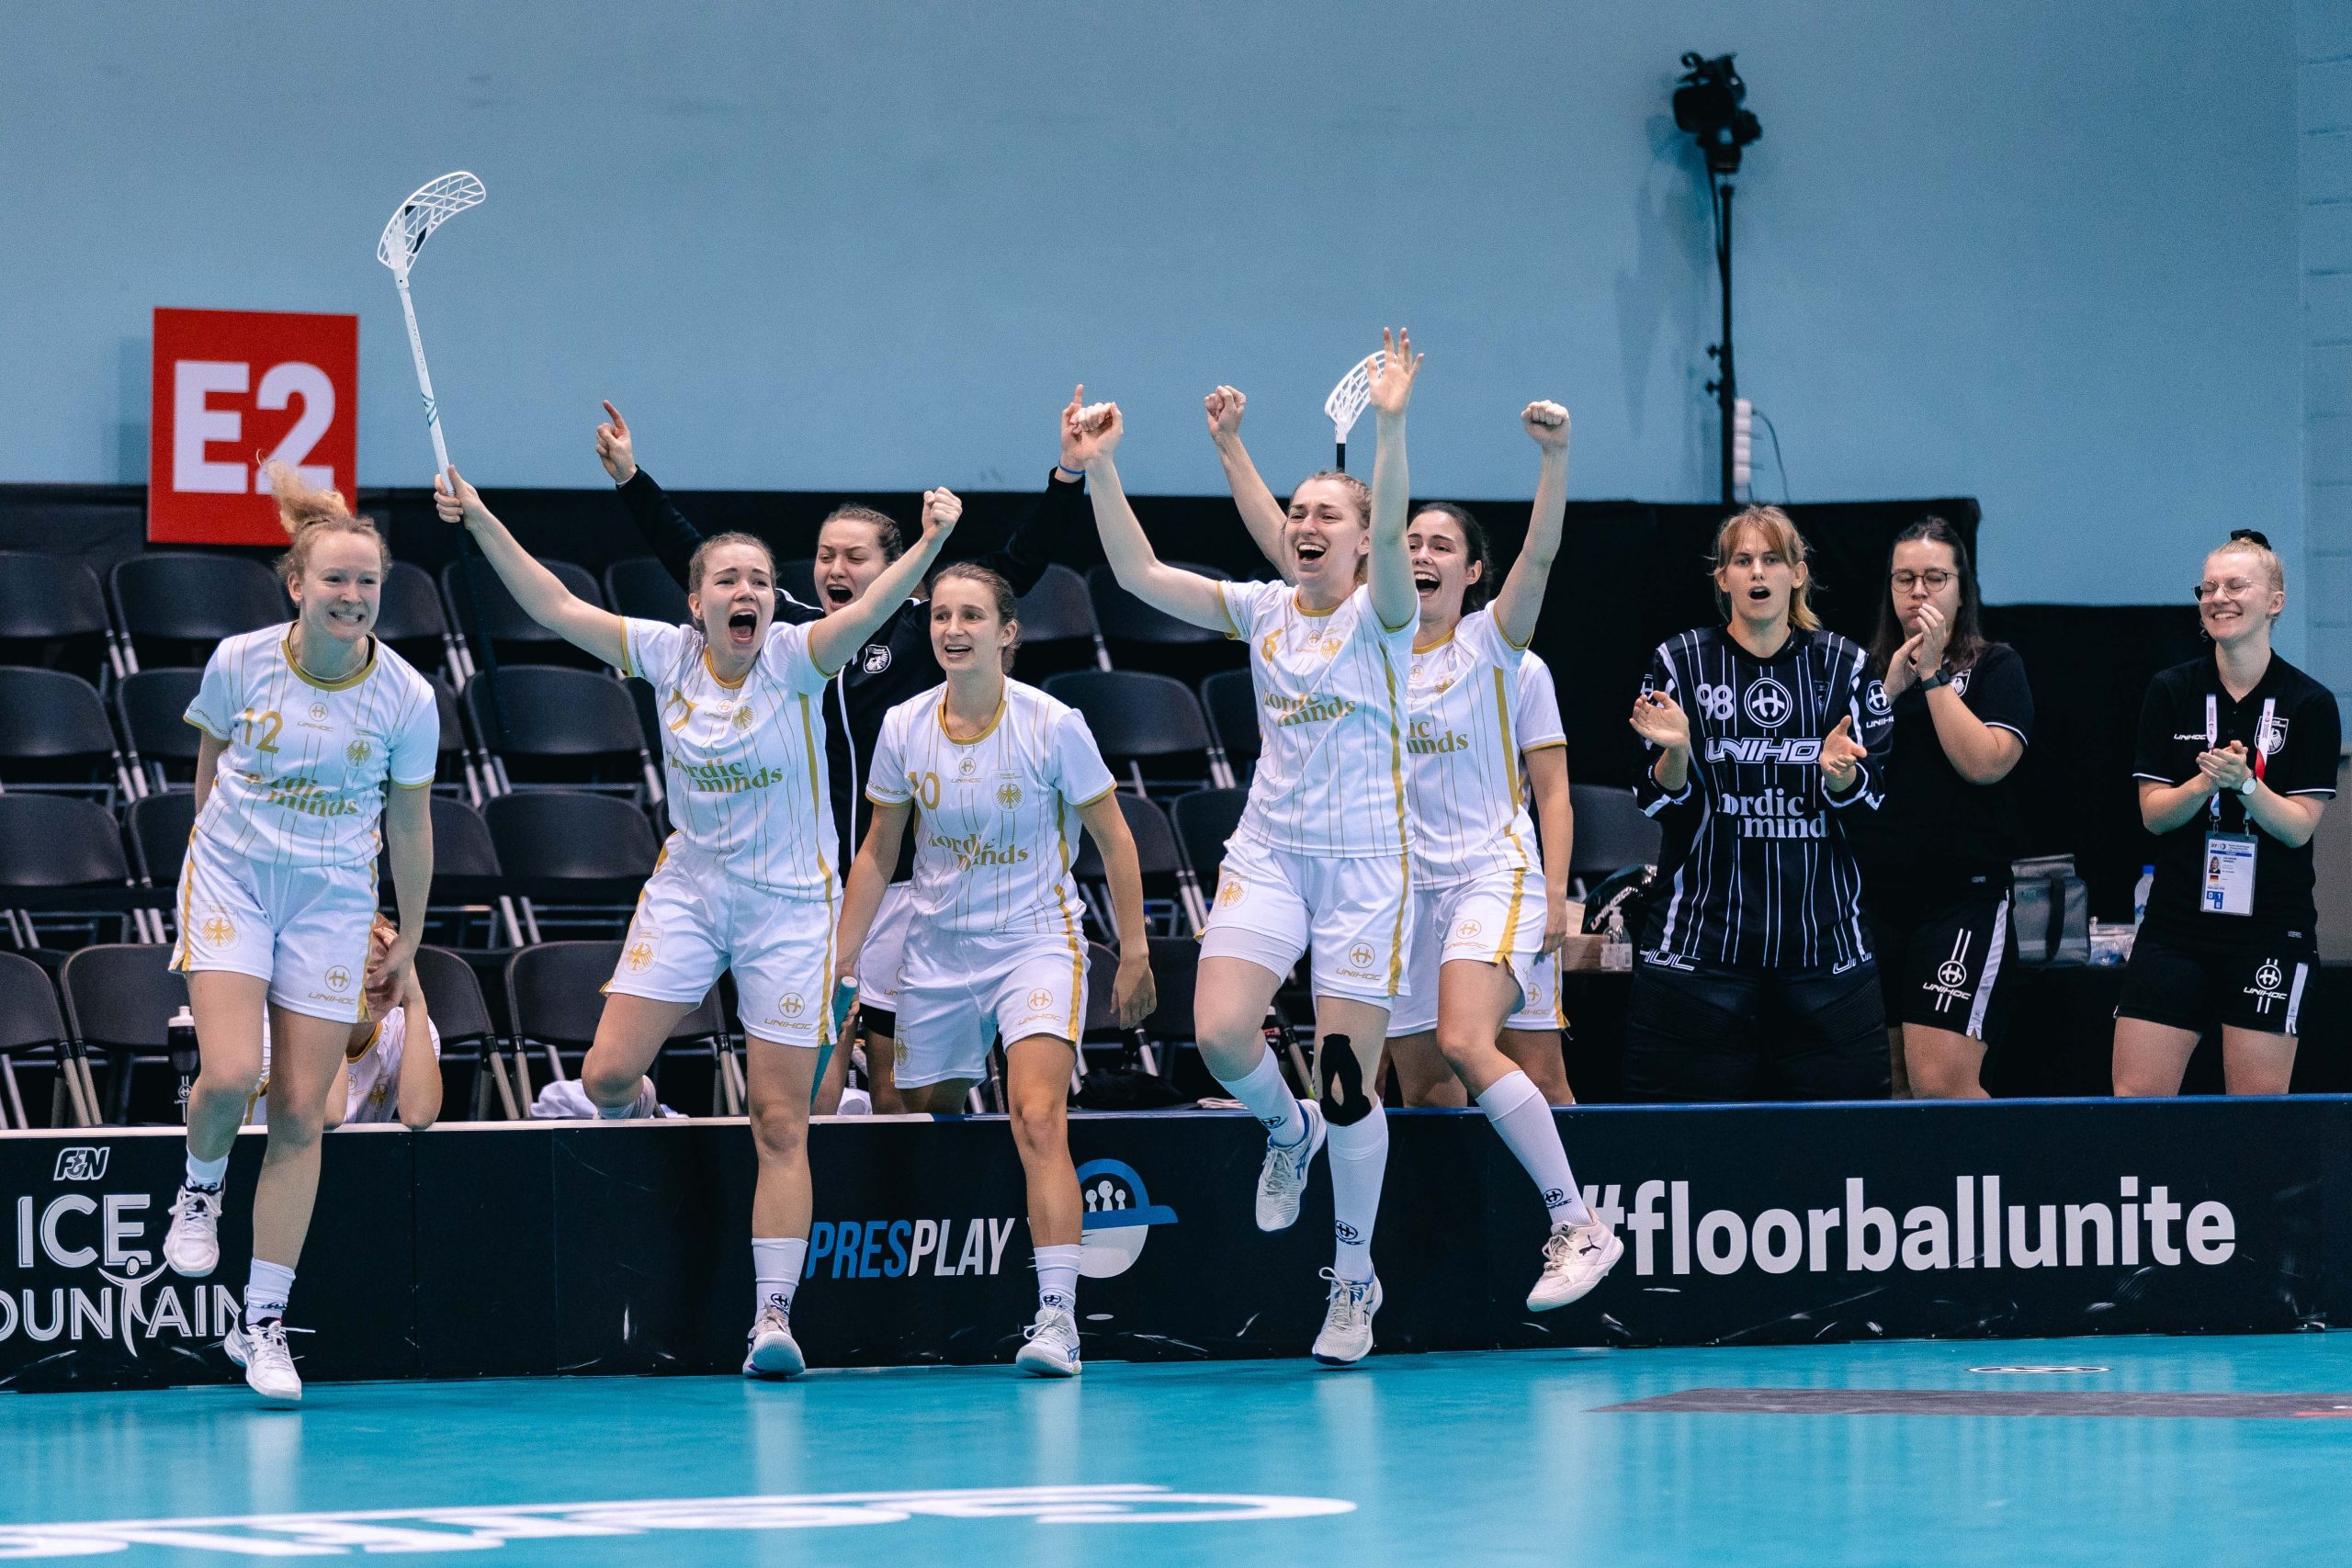 Women's World Floorball Championships 2023 - 7 December 2023, OCBC Arena, Singapore. Event page: www.wfc2023.sg Credits: Eng Chin An Instagram: @engchinan